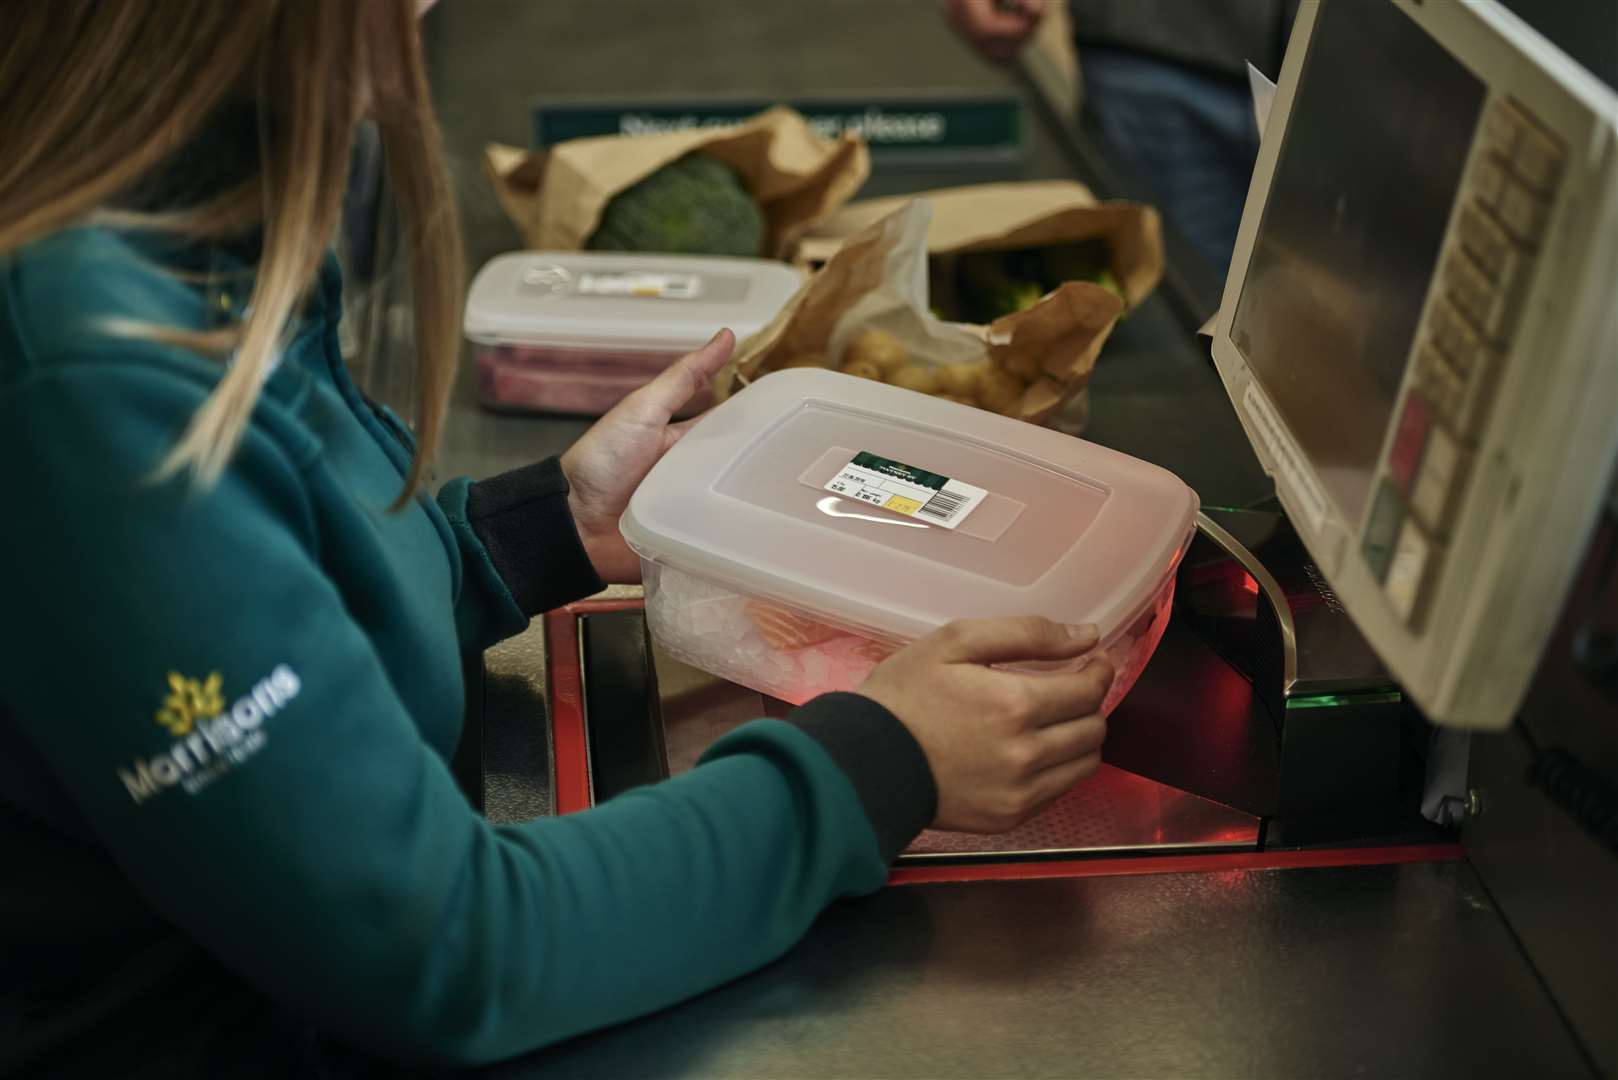 Shoppers are being encouraged to bring their own containers to Morrisons to collect fish, meat and deli products